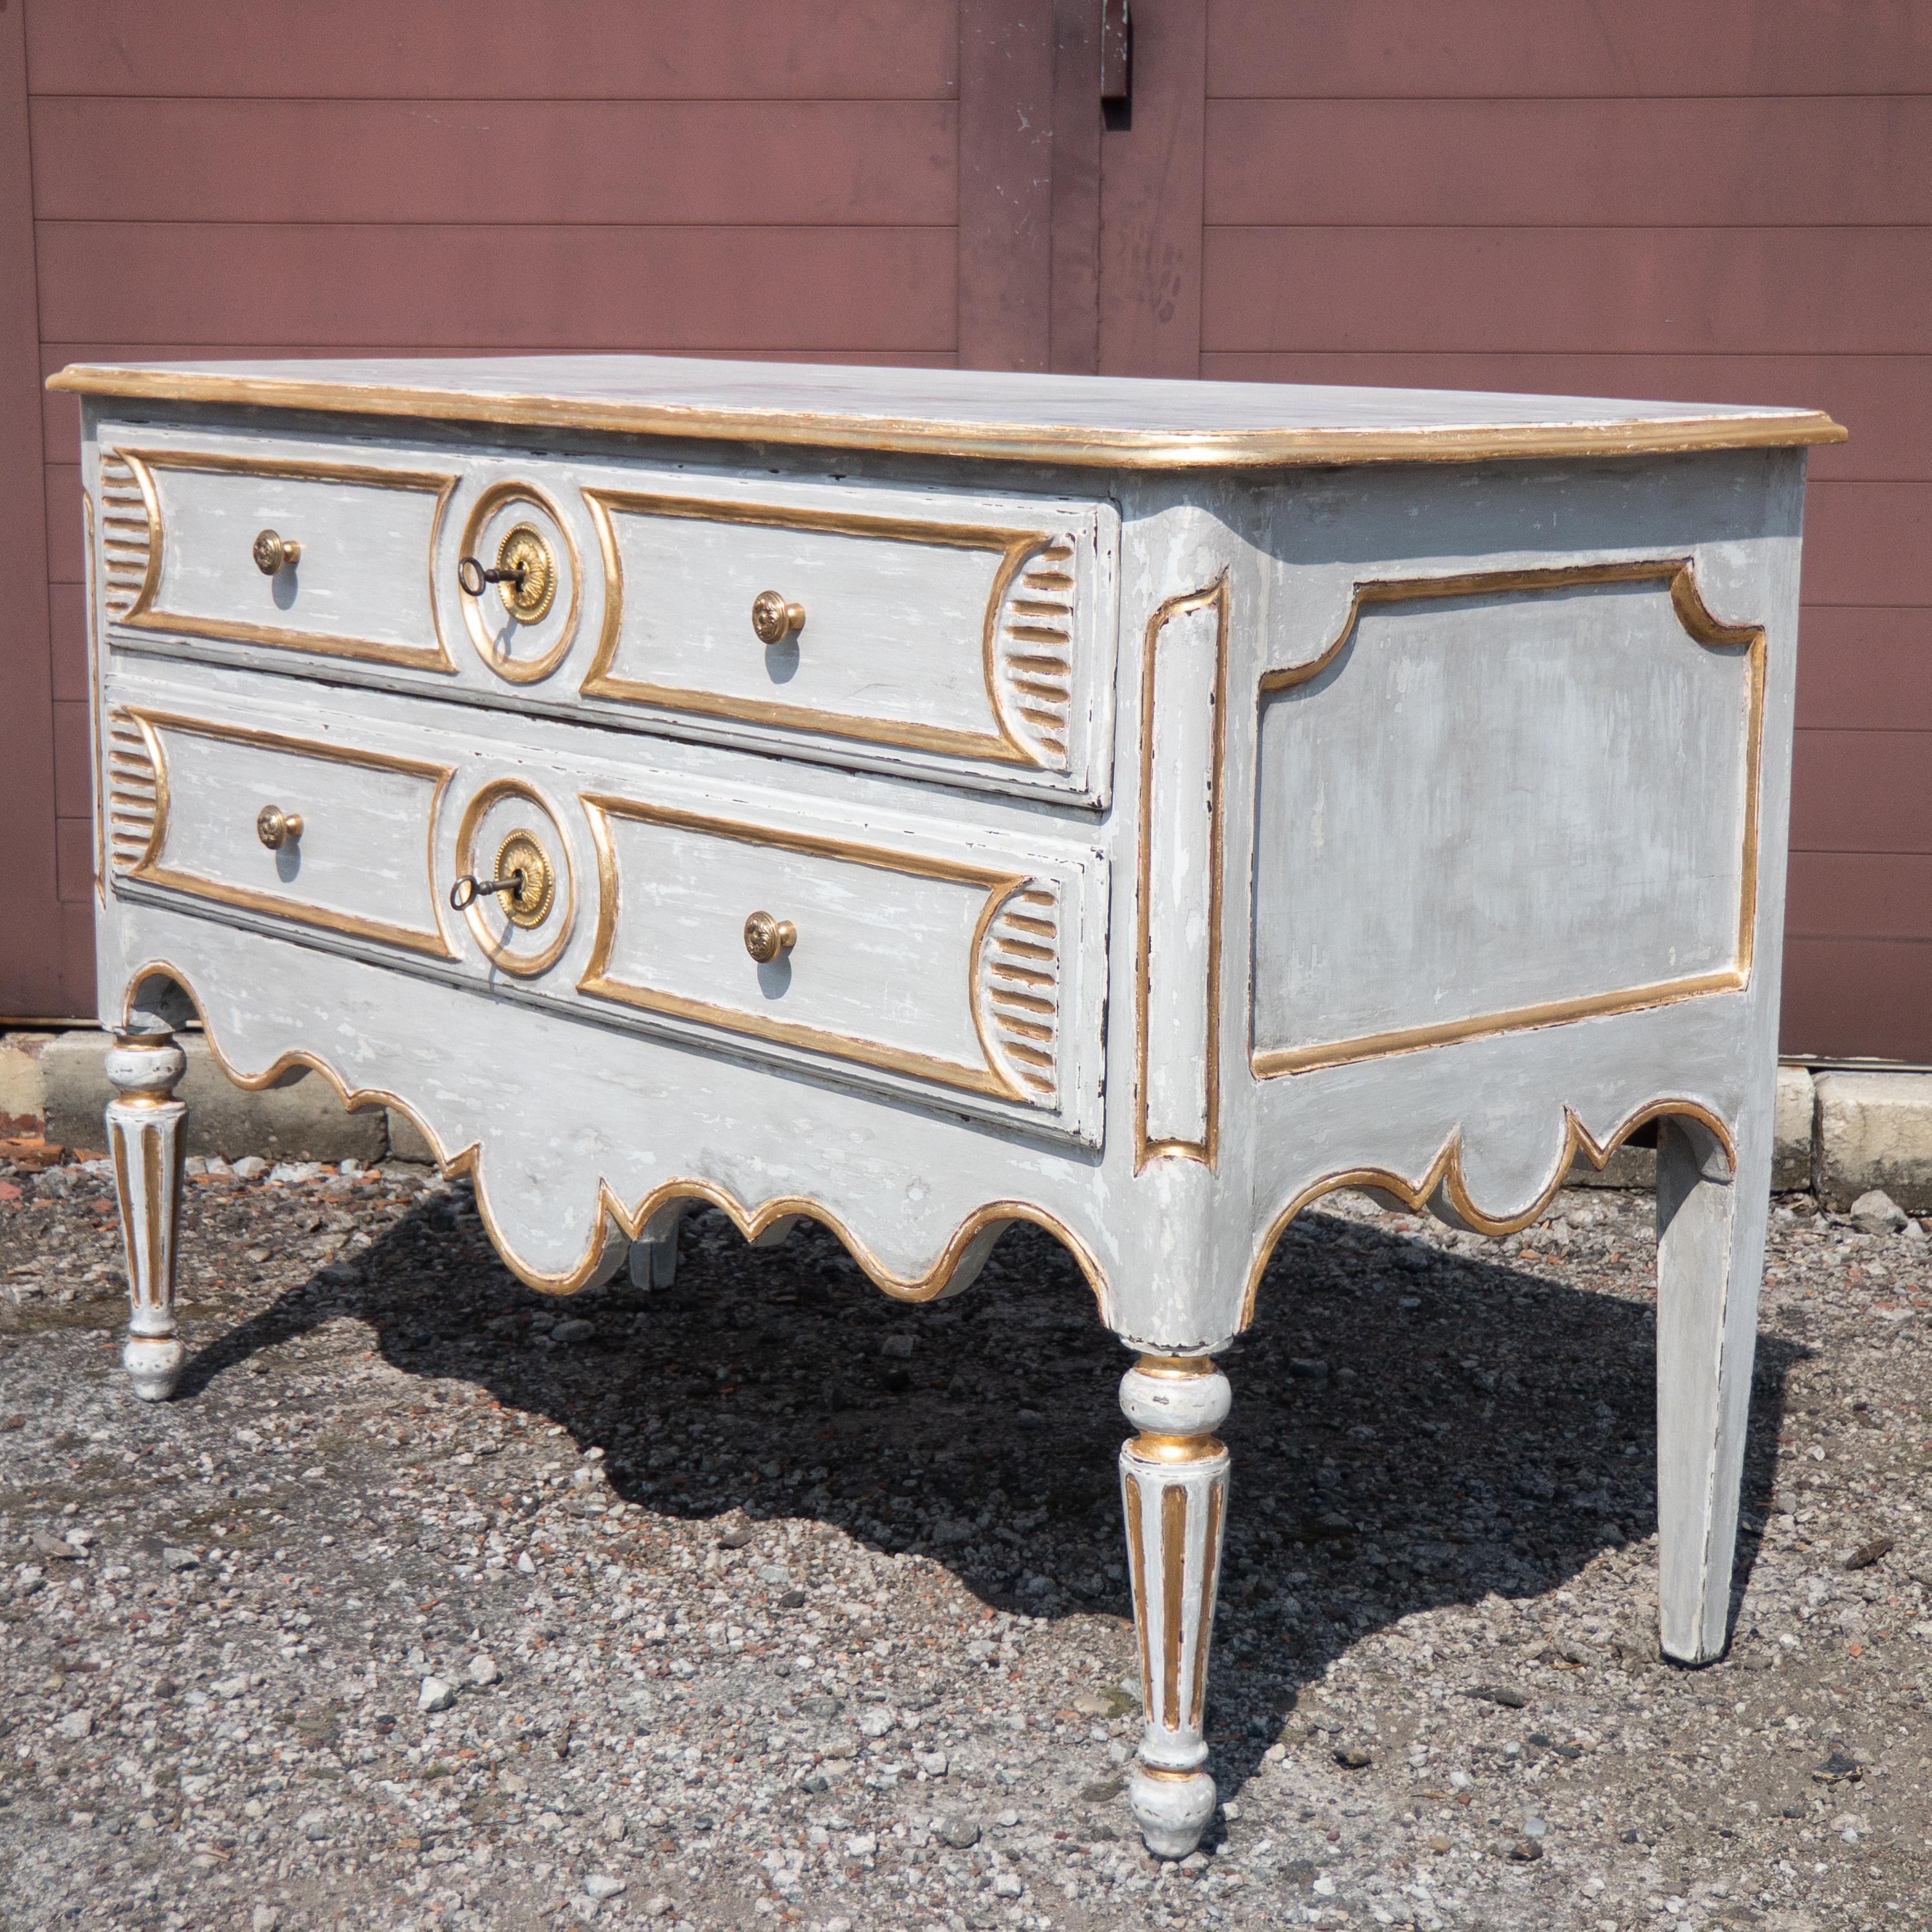 This extraordinary antique provincial commode or chest of drawers is made from Oak wood in France at the end of the 18th Century. The chest has two drawers, each with a separate working lock, and brass fittings. The commode has a beautiful grey and